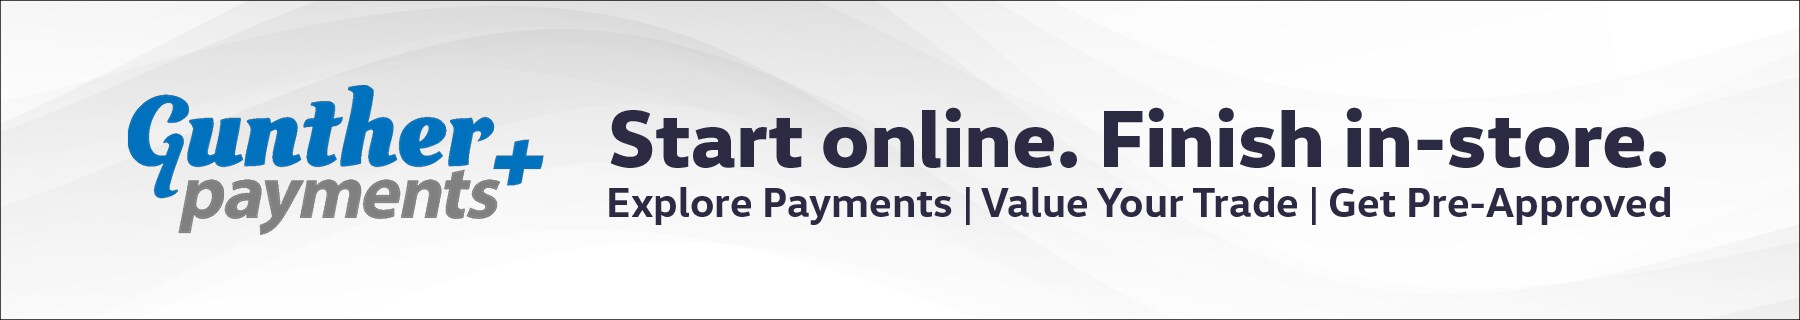 Gunther Payments Plus. Start 
online. Finish in-store.